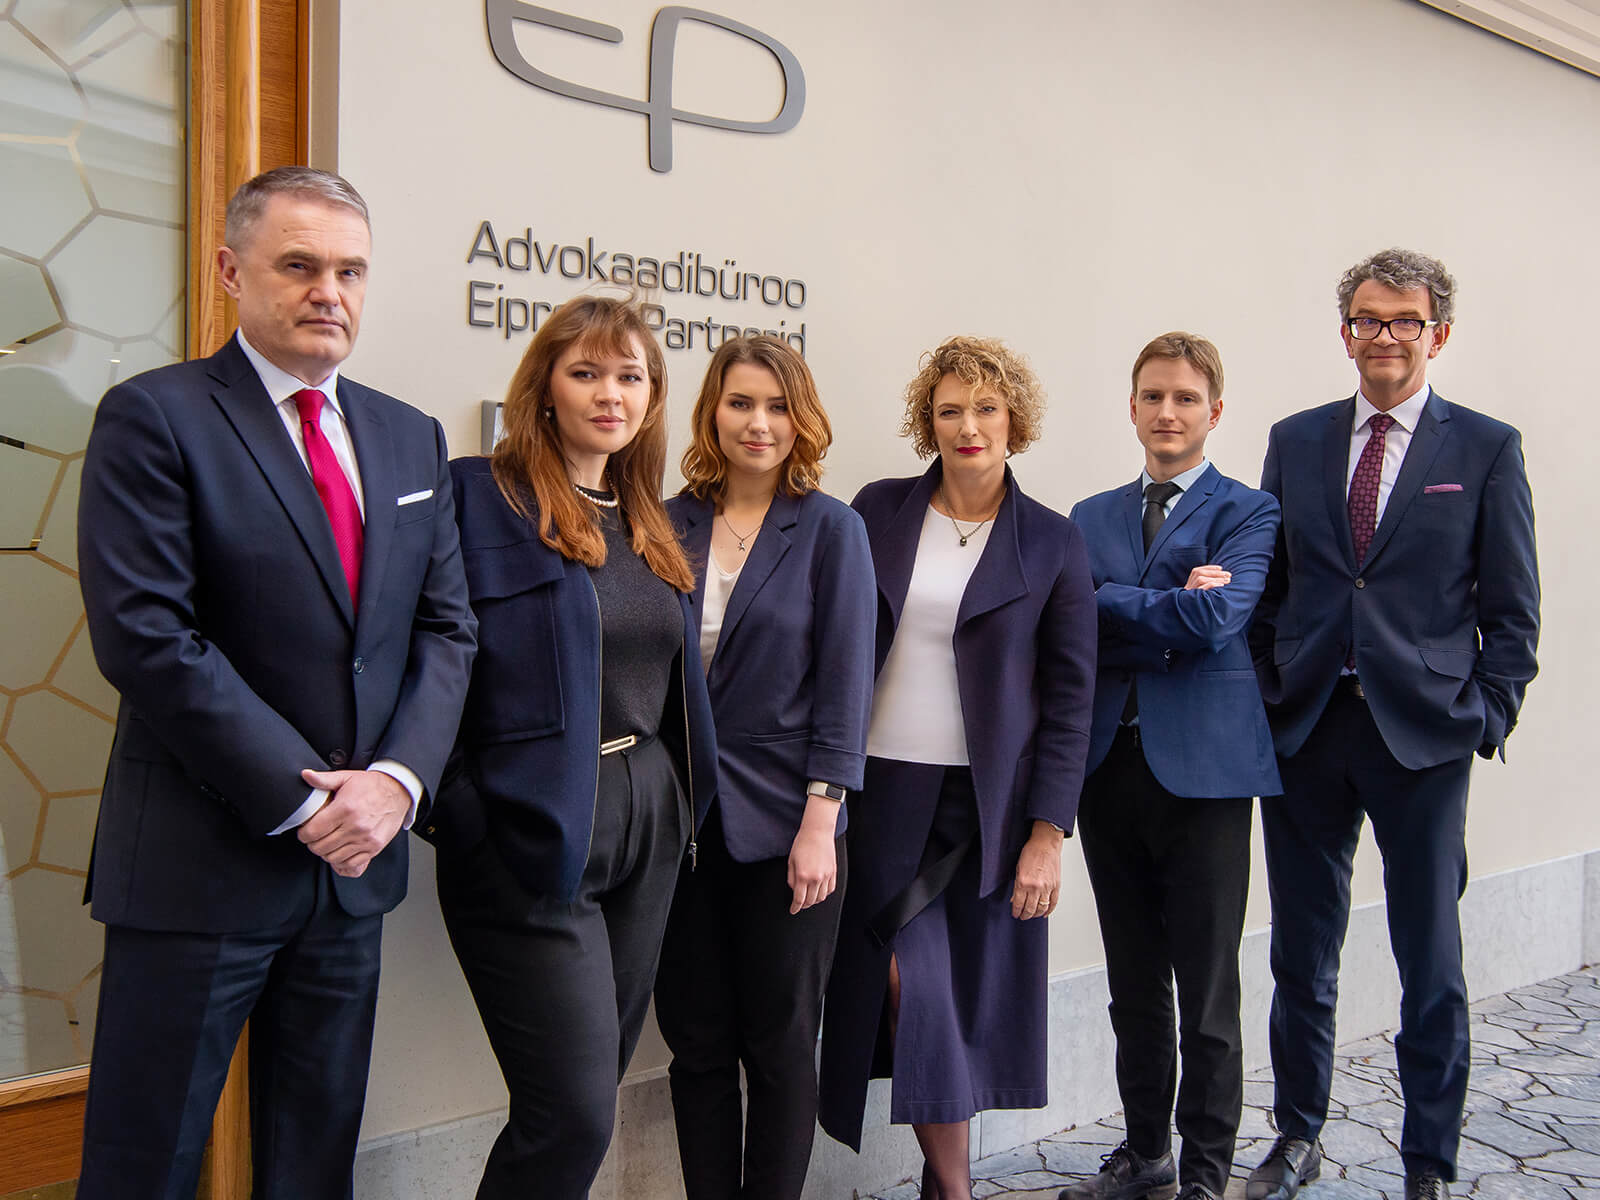 The Eipre & Partners Law Firm